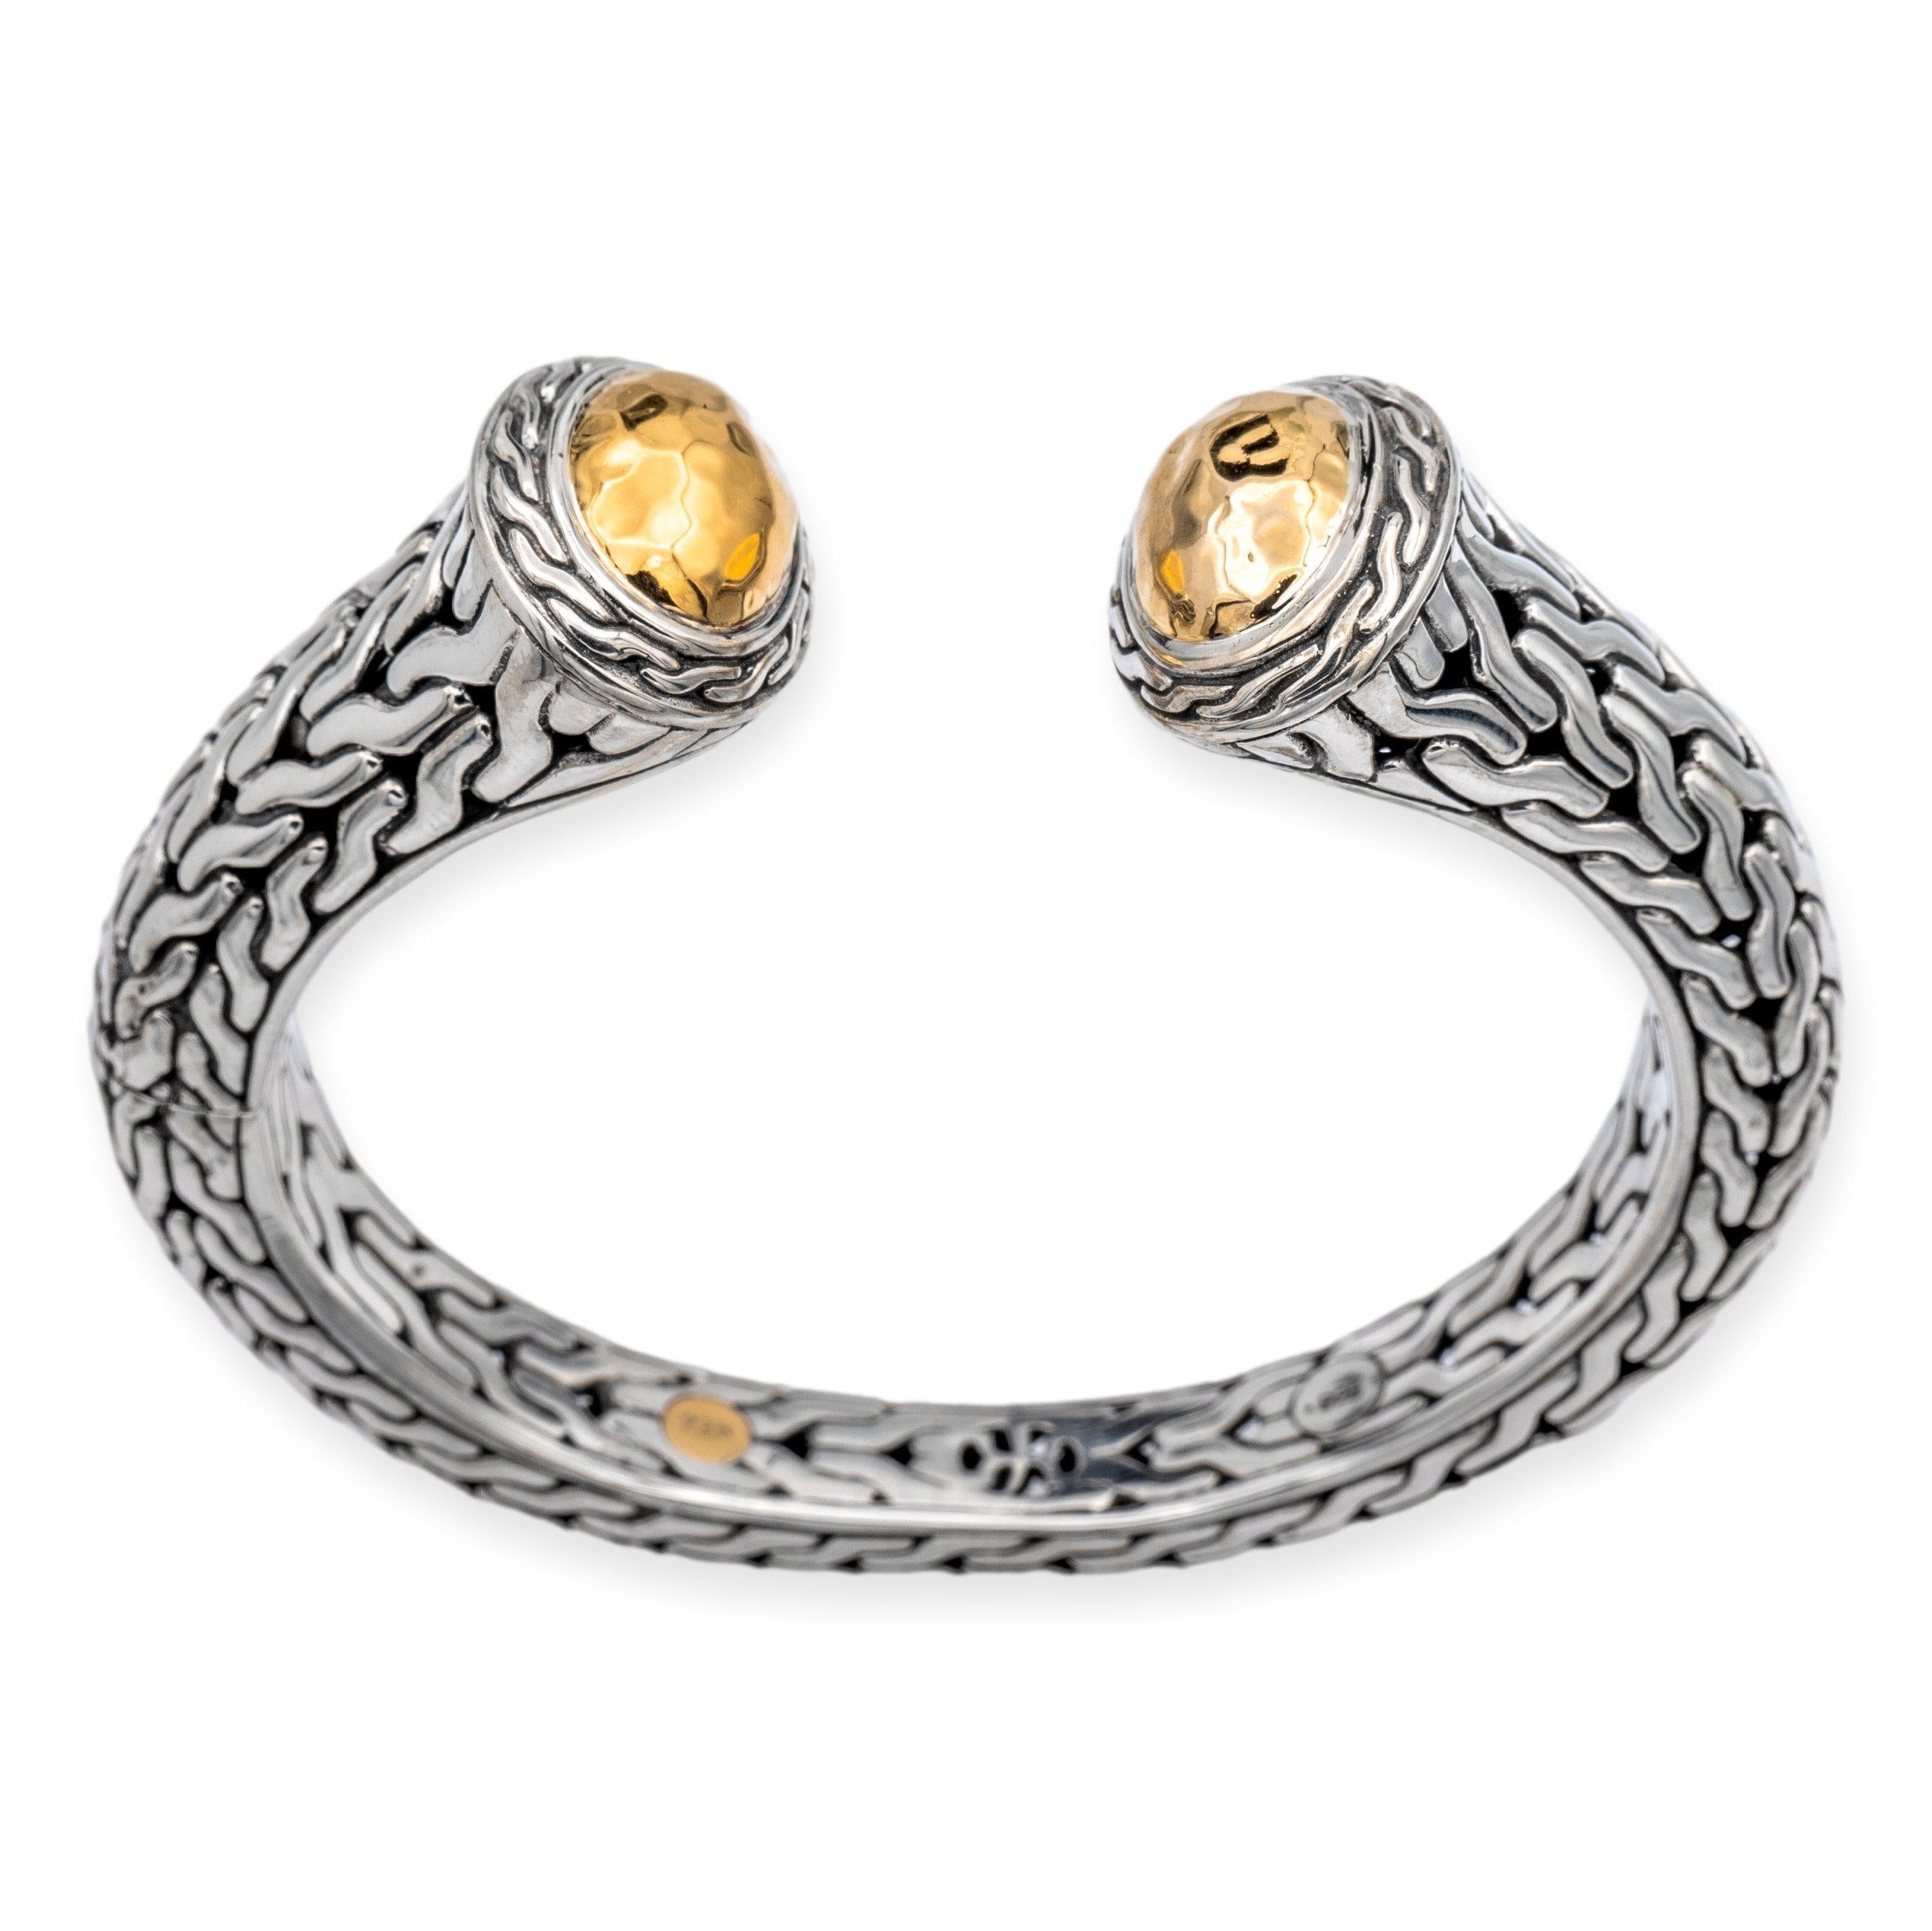 John Hardy Palu hinged open cuff bracelet from the classic chain collection finely crafted in sterling siIver featuring two gold domes at each end with a hammer finish in 22 karat yellow gold inside a chain link bezel design. One end opens up for